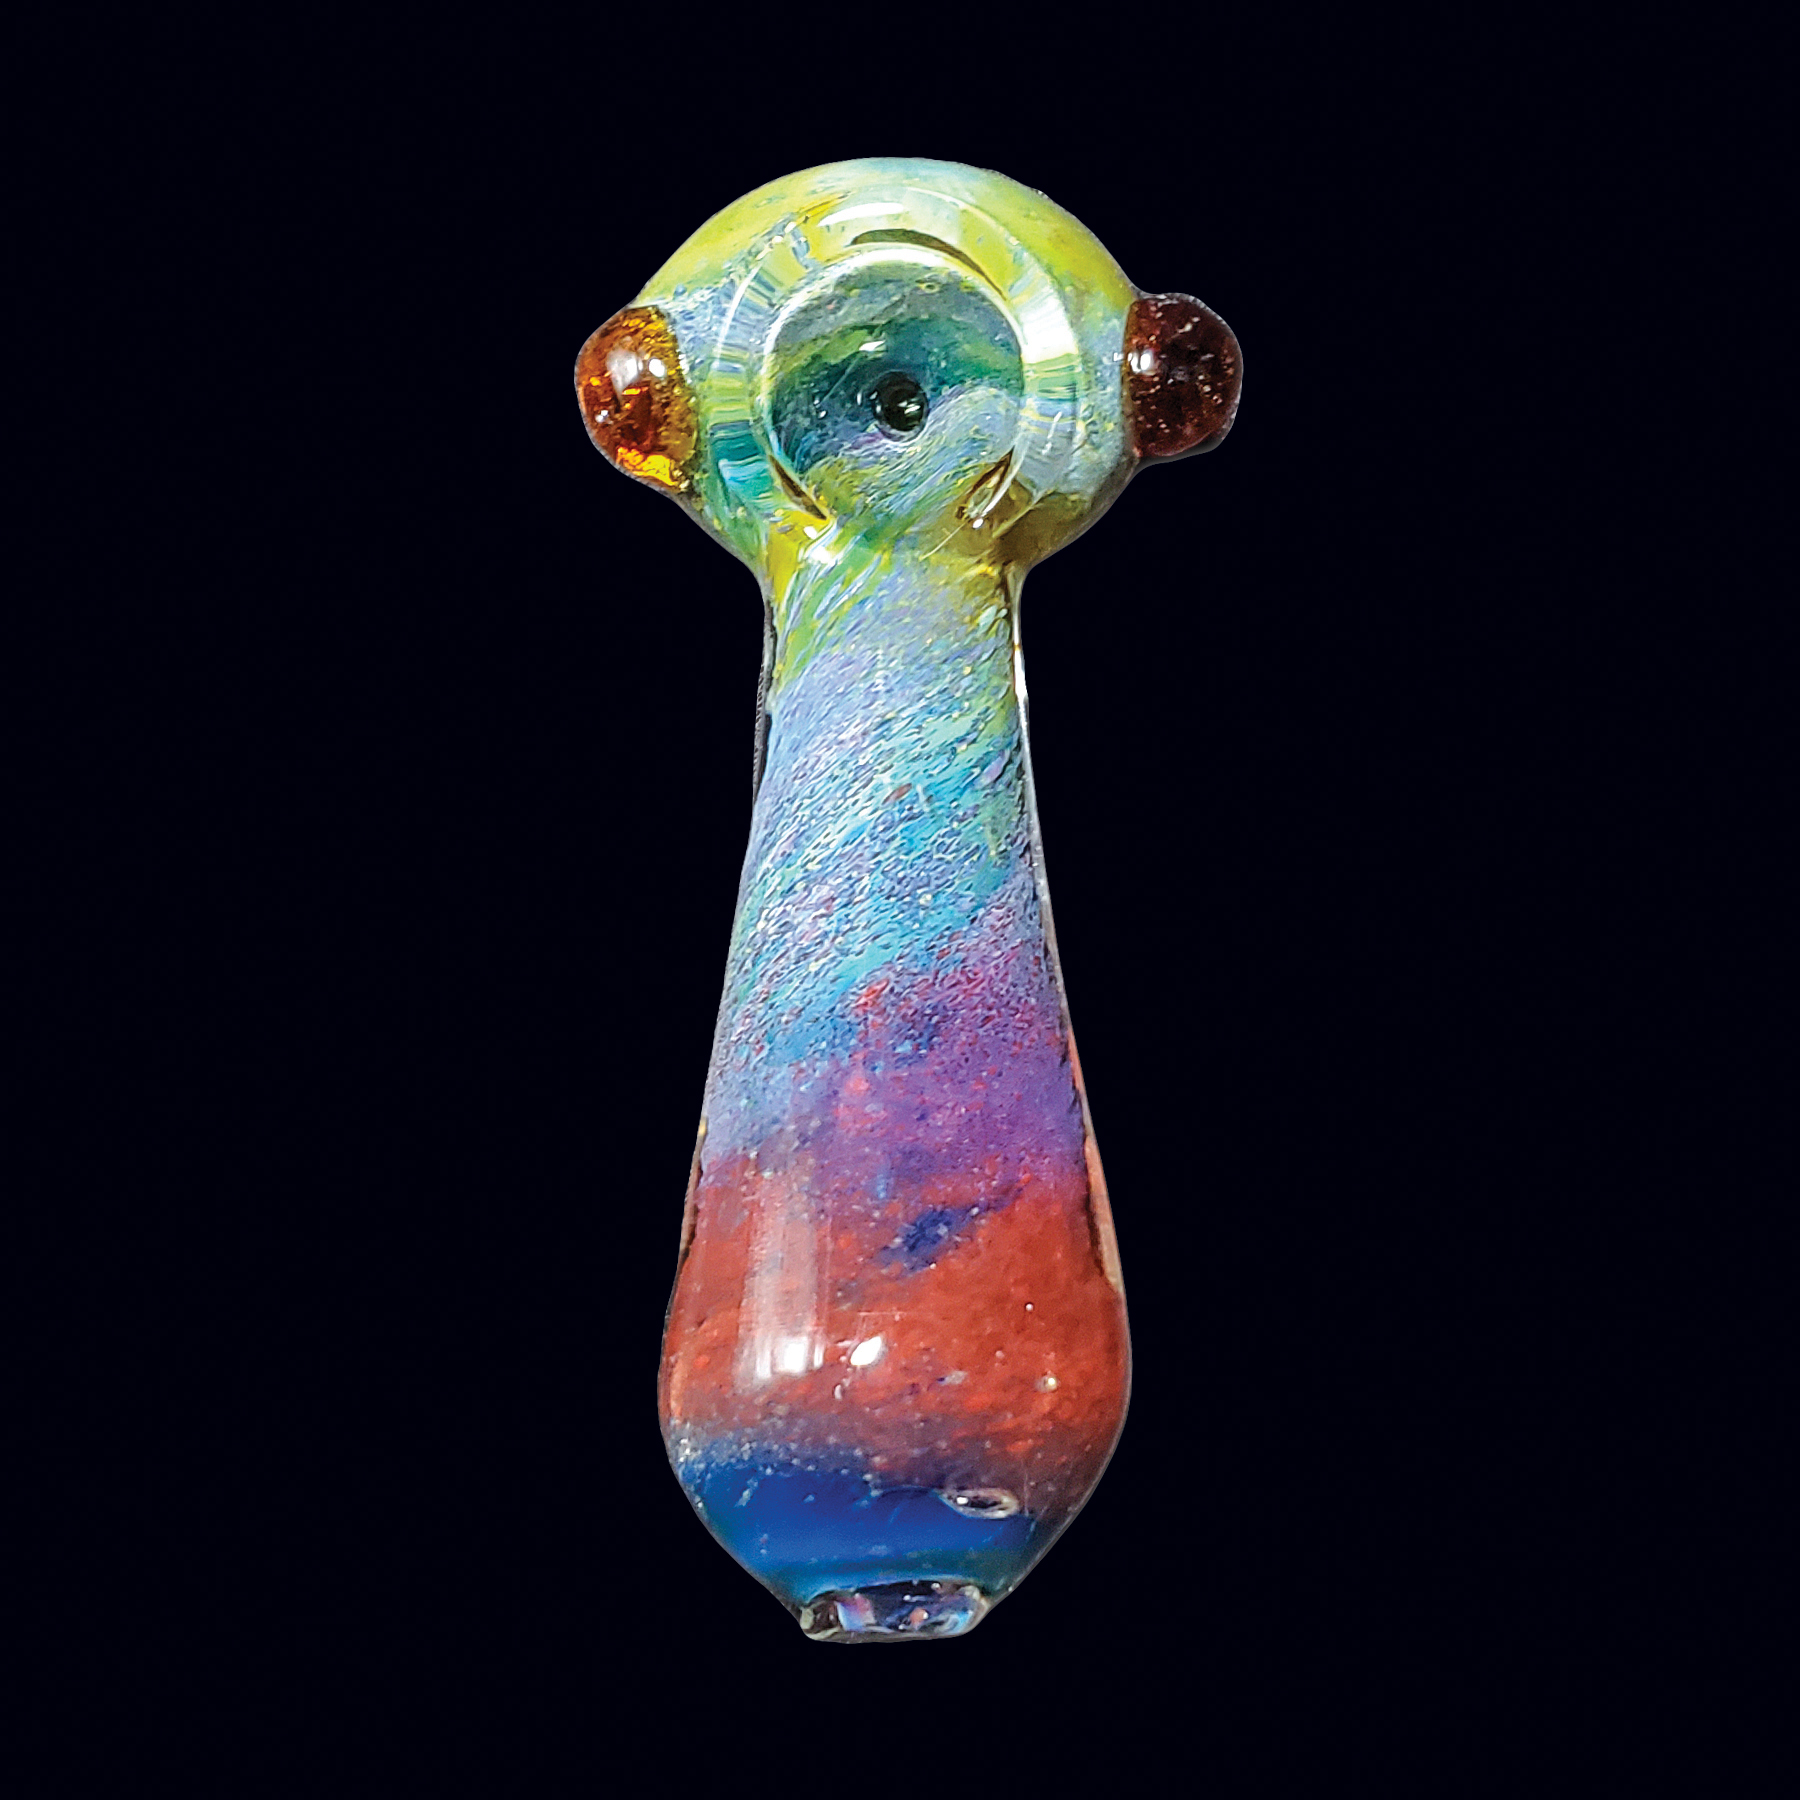 A colorful glass pipe is shown on a black background.